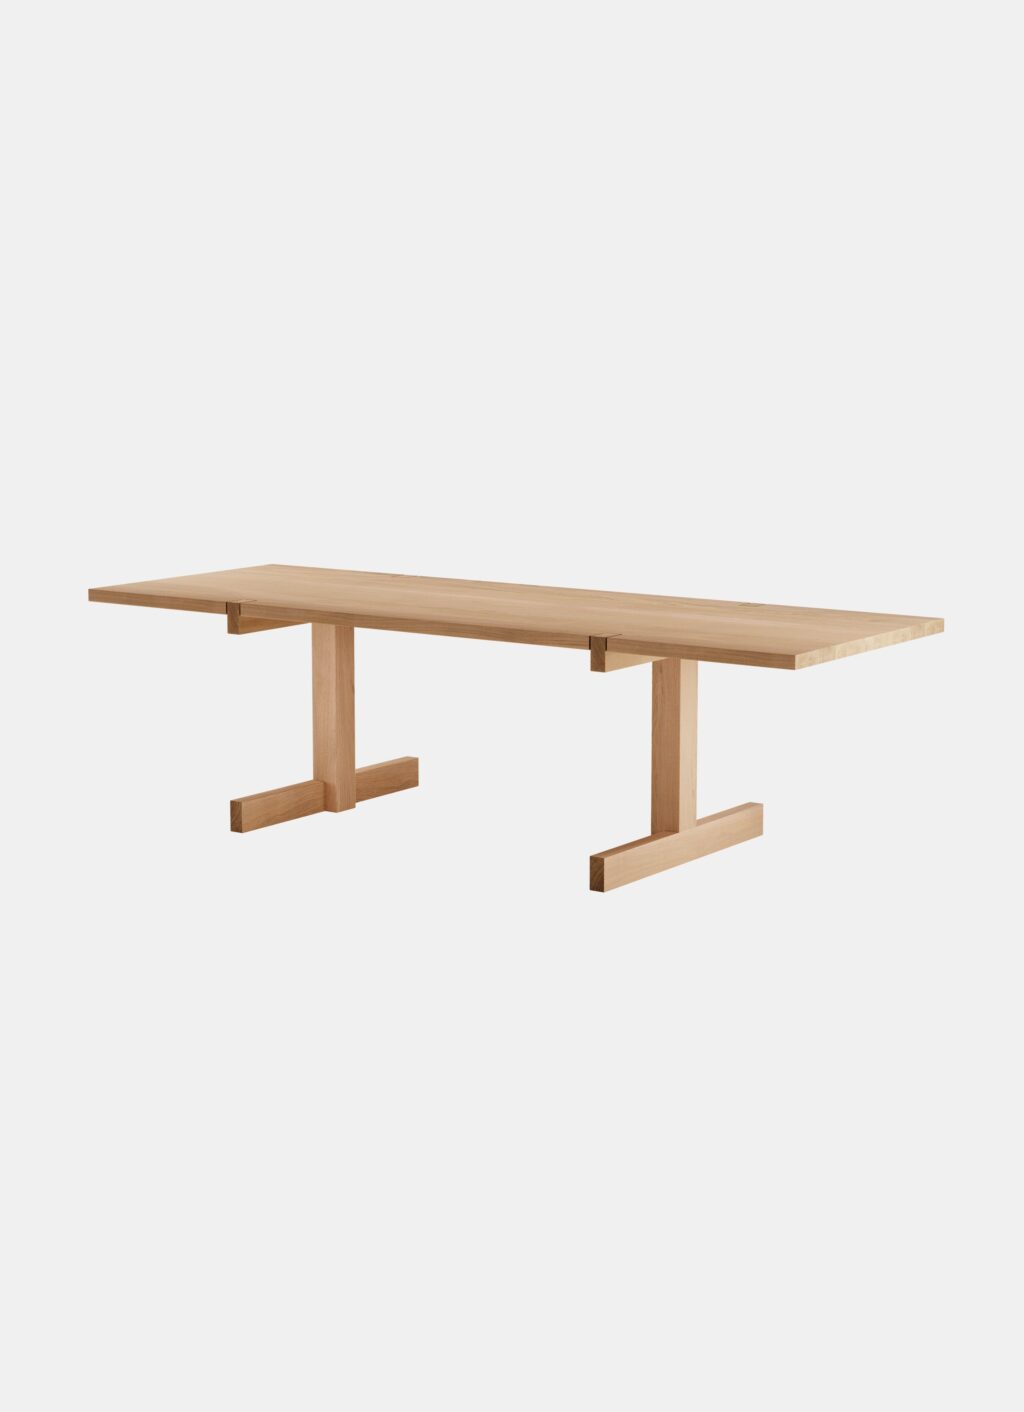 Objekte unserer Tage - OUT - Richter - Table - different woods and sizes